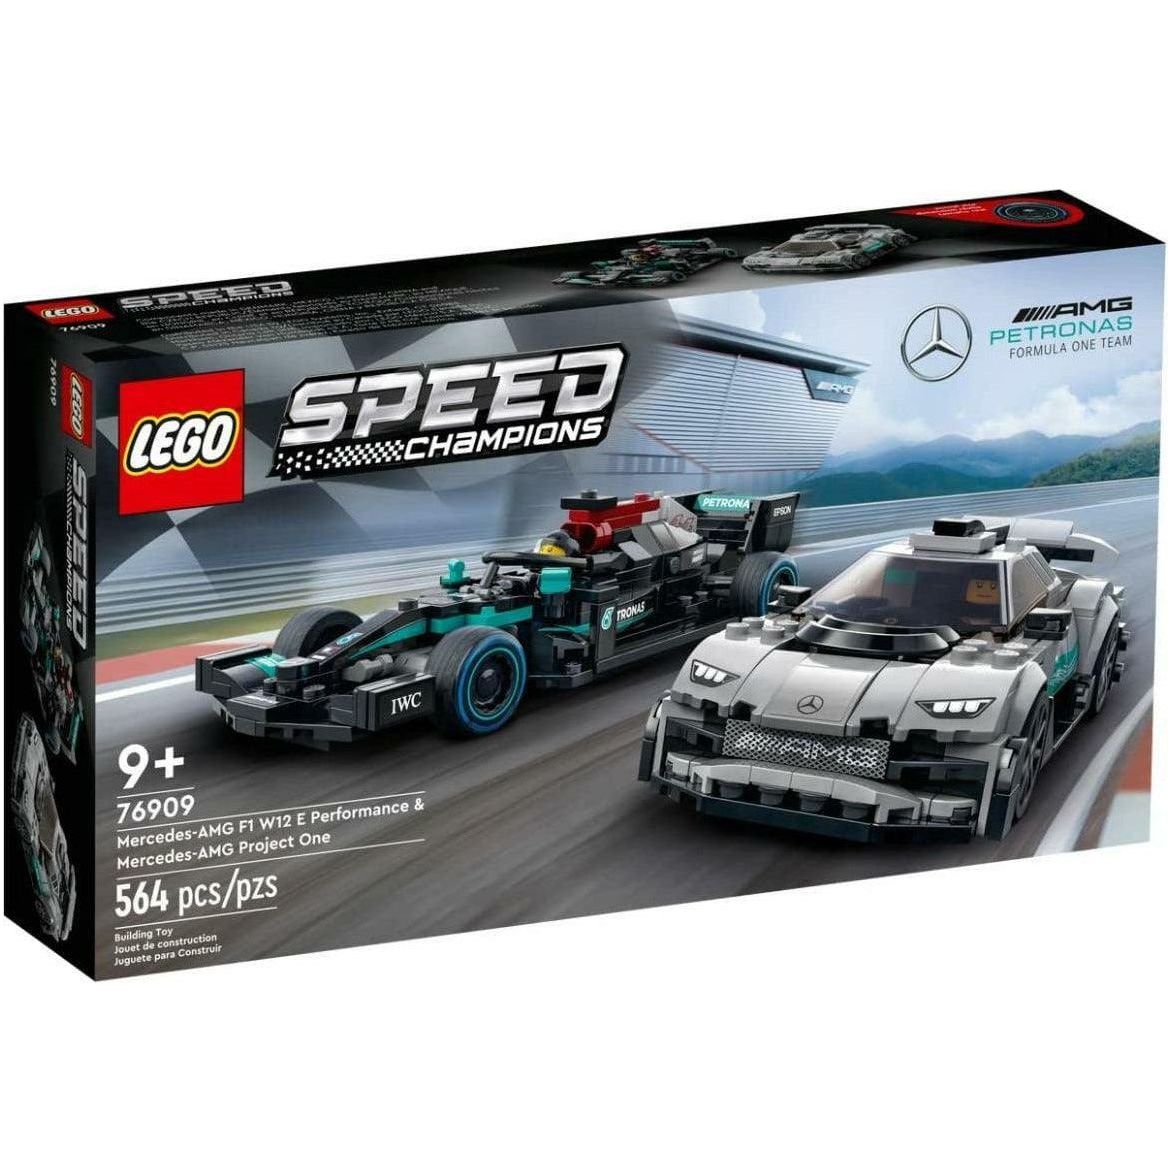 LEGO 76909 Speed Champions Mercedes-AMG F1 W12 E Performance & Mercedes-AMG 564 Pieces - BumbleToys - 8+ Years, 8-13 Years, Boys, LEGO, OXE, Pre-Order